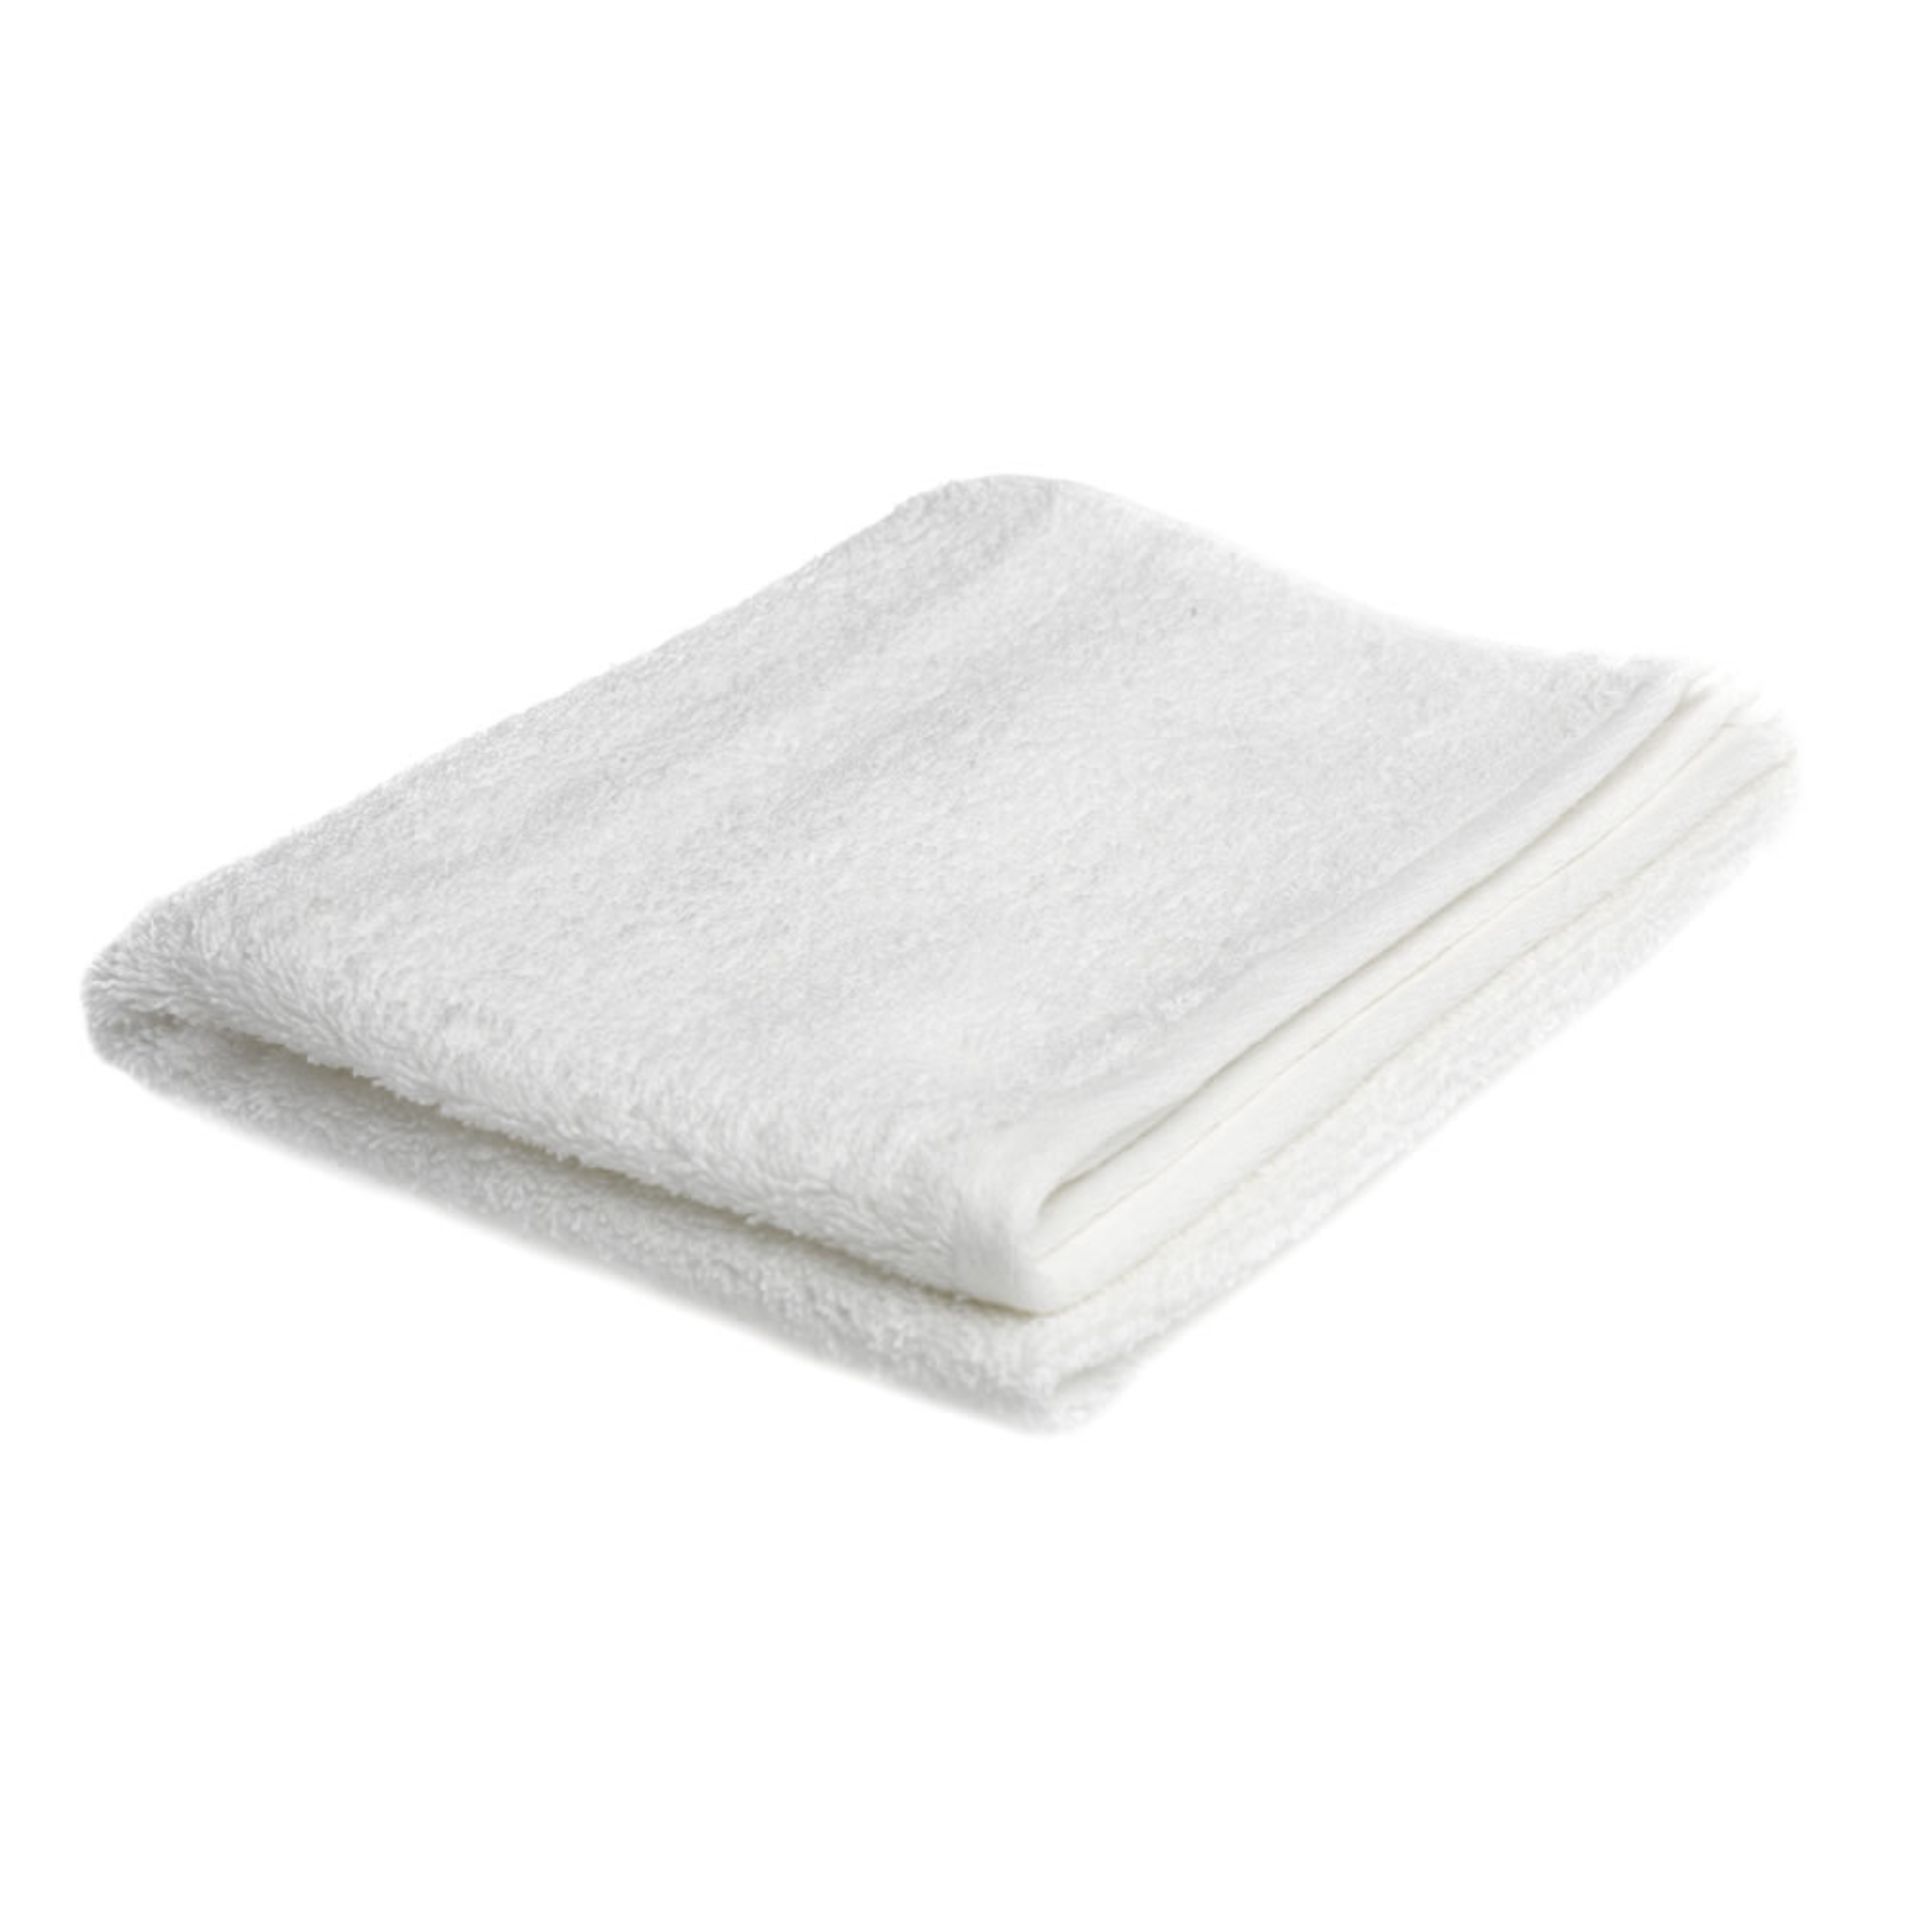 96 x White Hand Towels 34x60cm (Delivery Available)